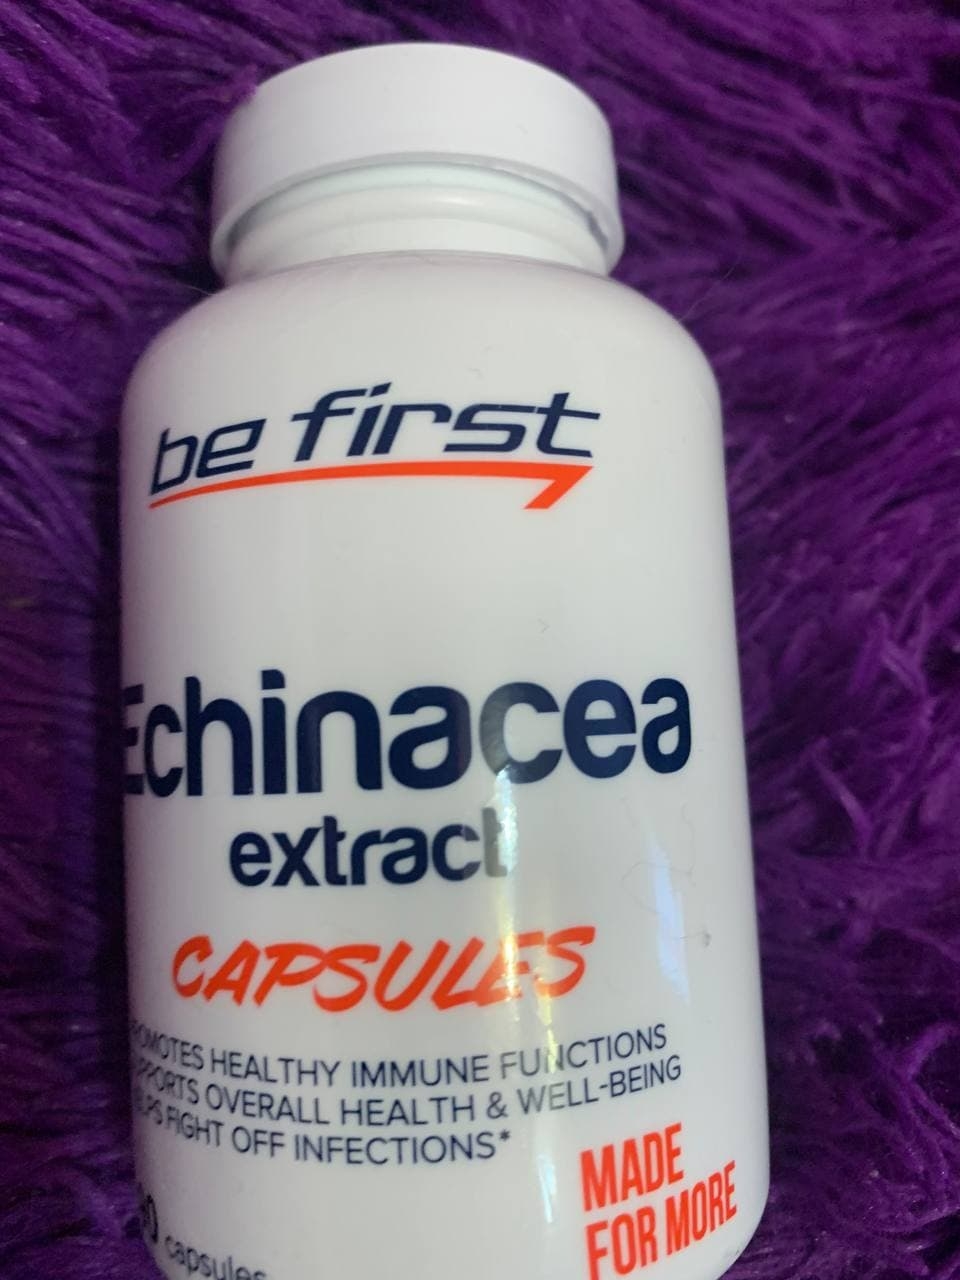 Be First Echinacea extract capsules, 90 капсул - Мне нравится эта добавка